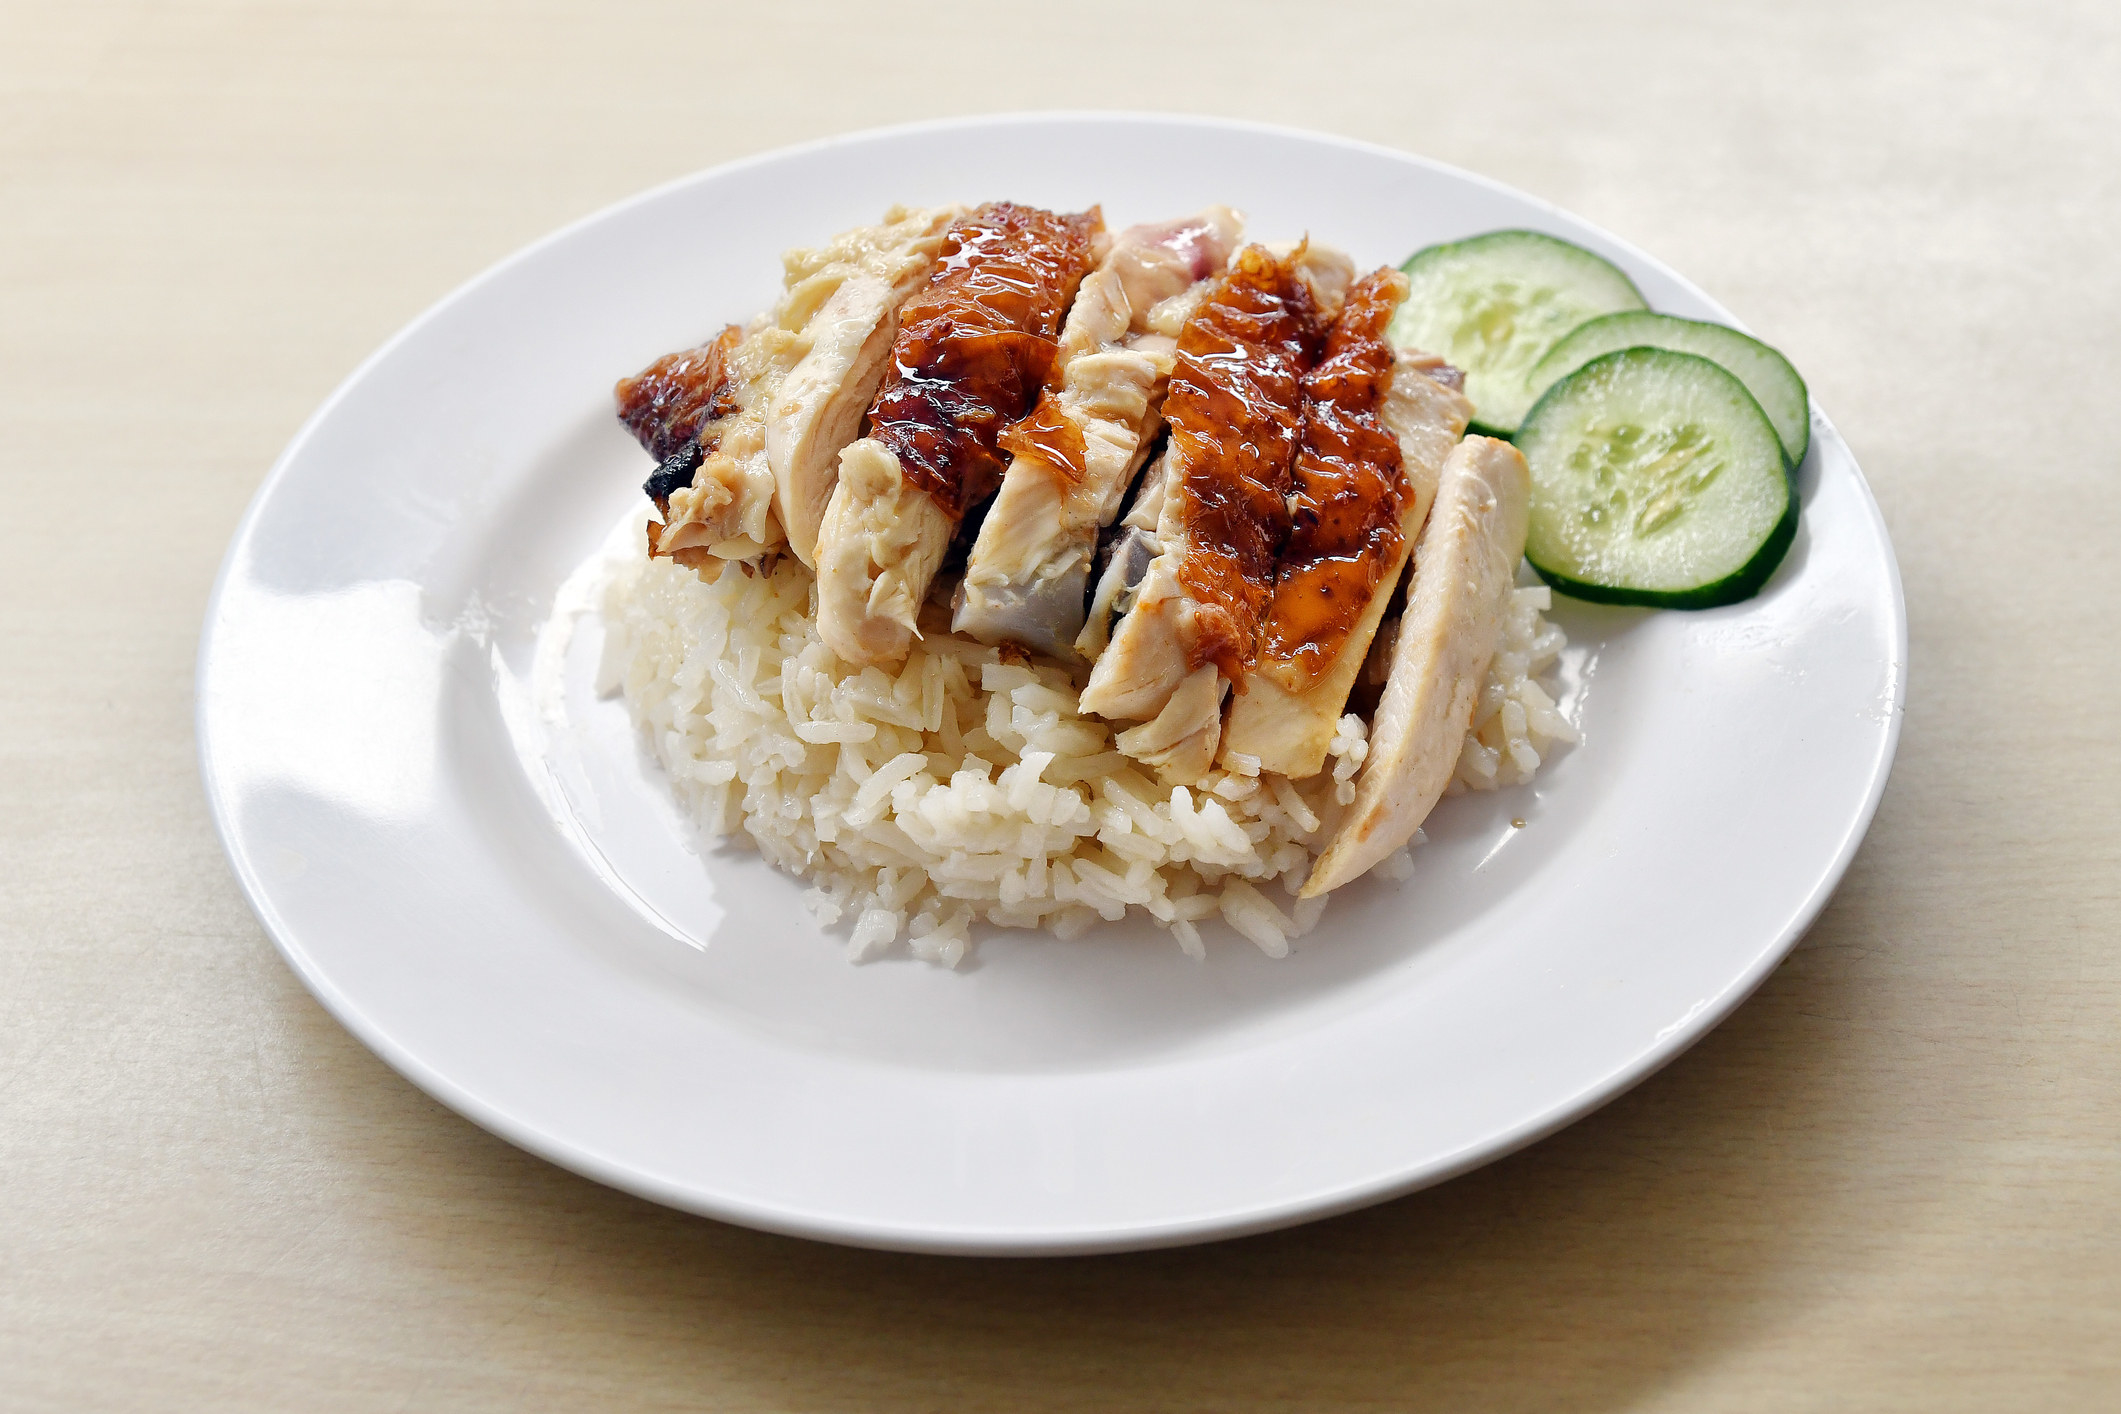 Singaporean chicken rice with cucumbers and spicy sauce.